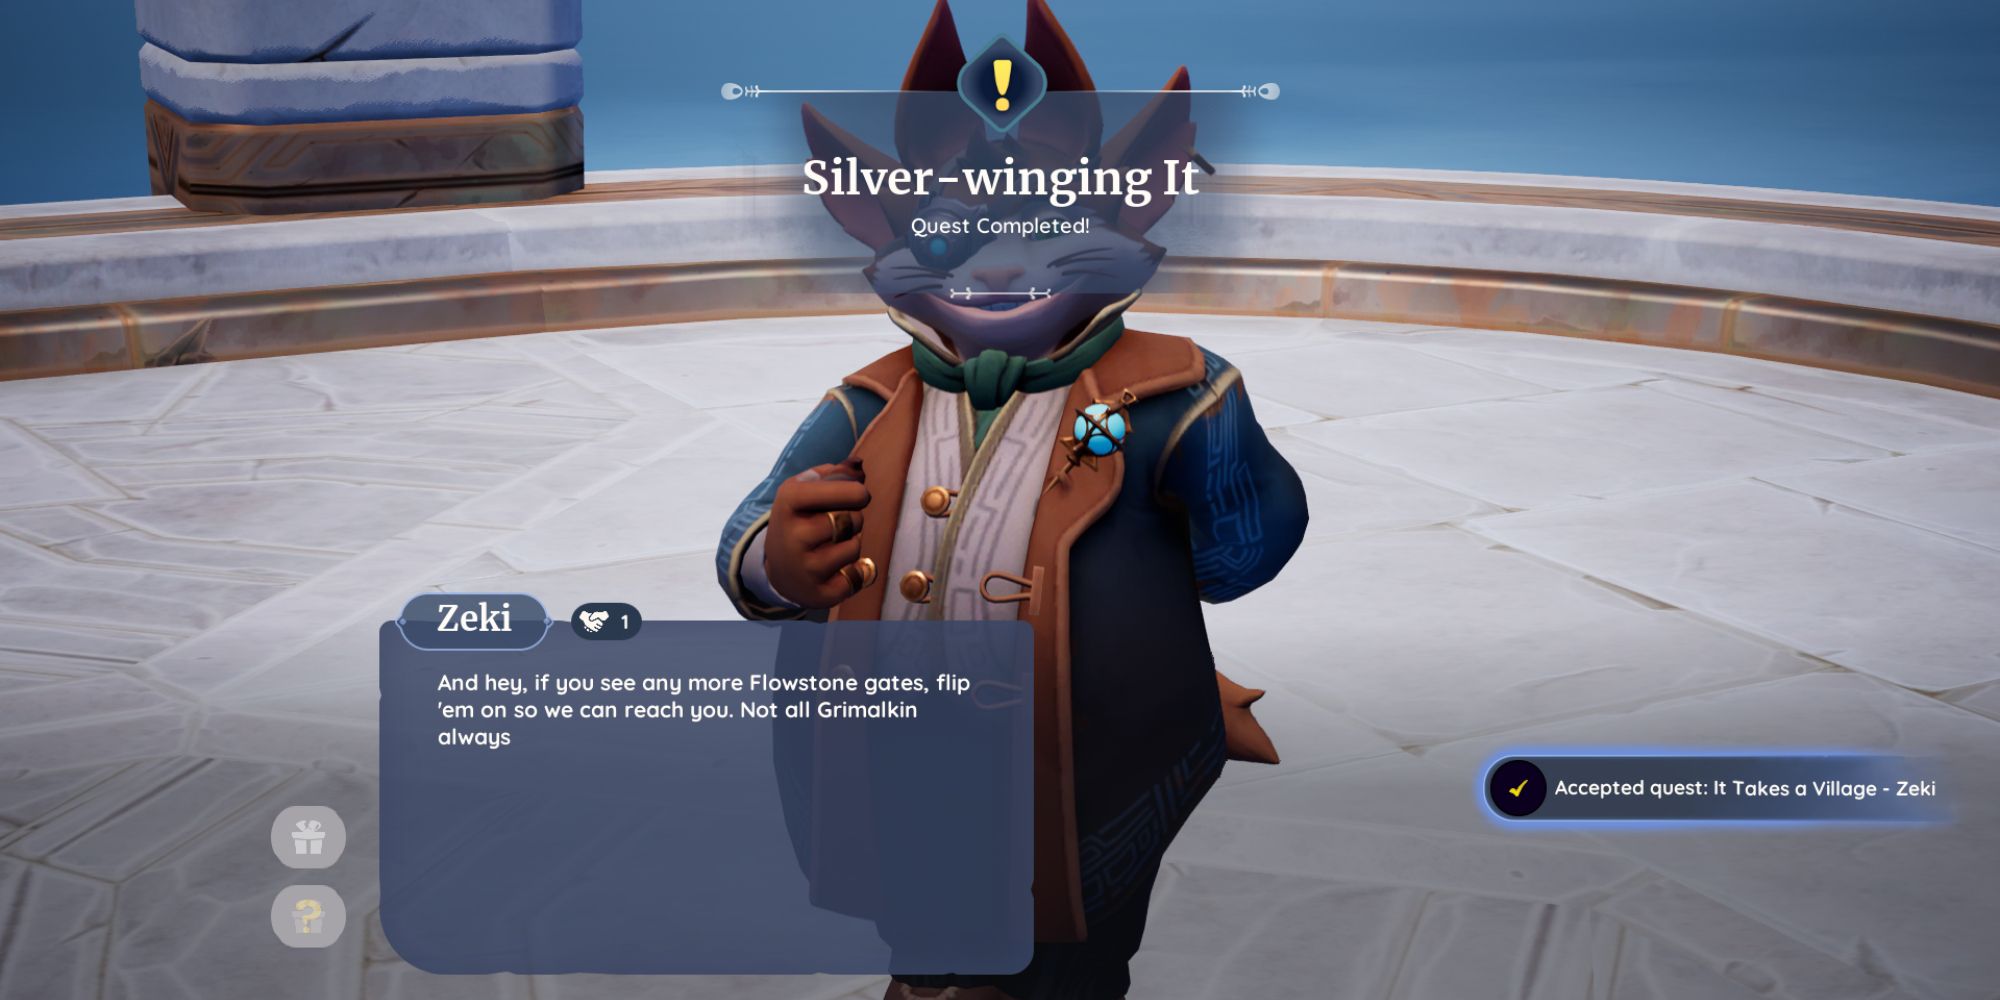 Dialogue with Zeki and the introduction to the Silver-Winging It quest